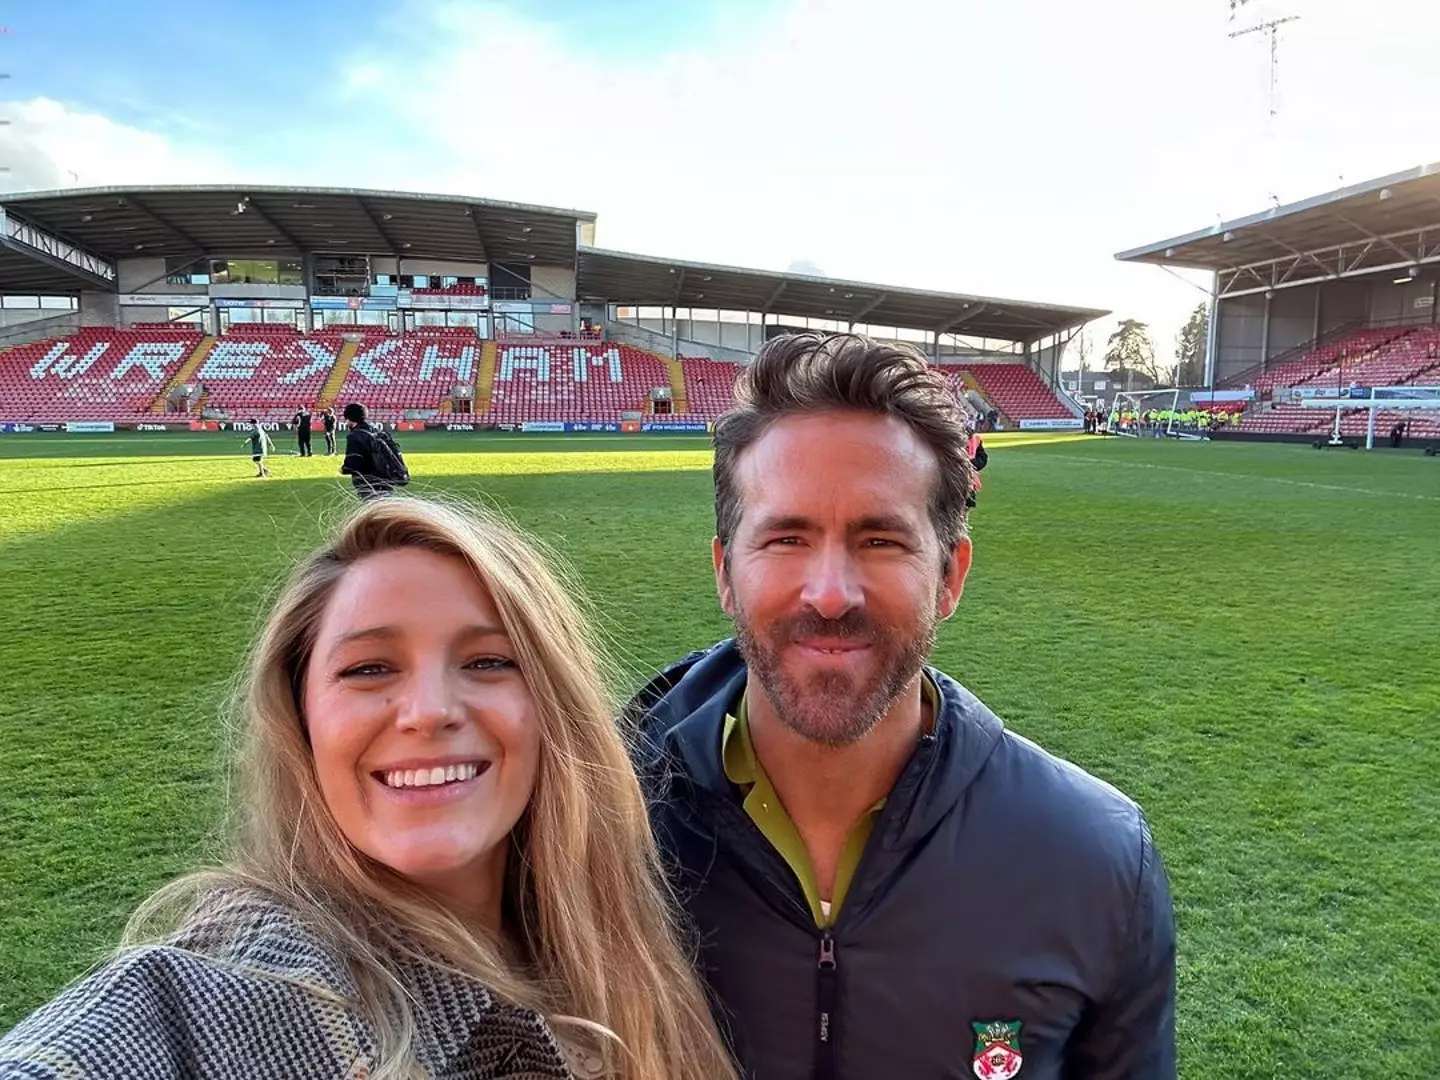 Ryan Reynolds didn't tell his wife, Blake Lively, after he spent millions buying Wrexham AFC.